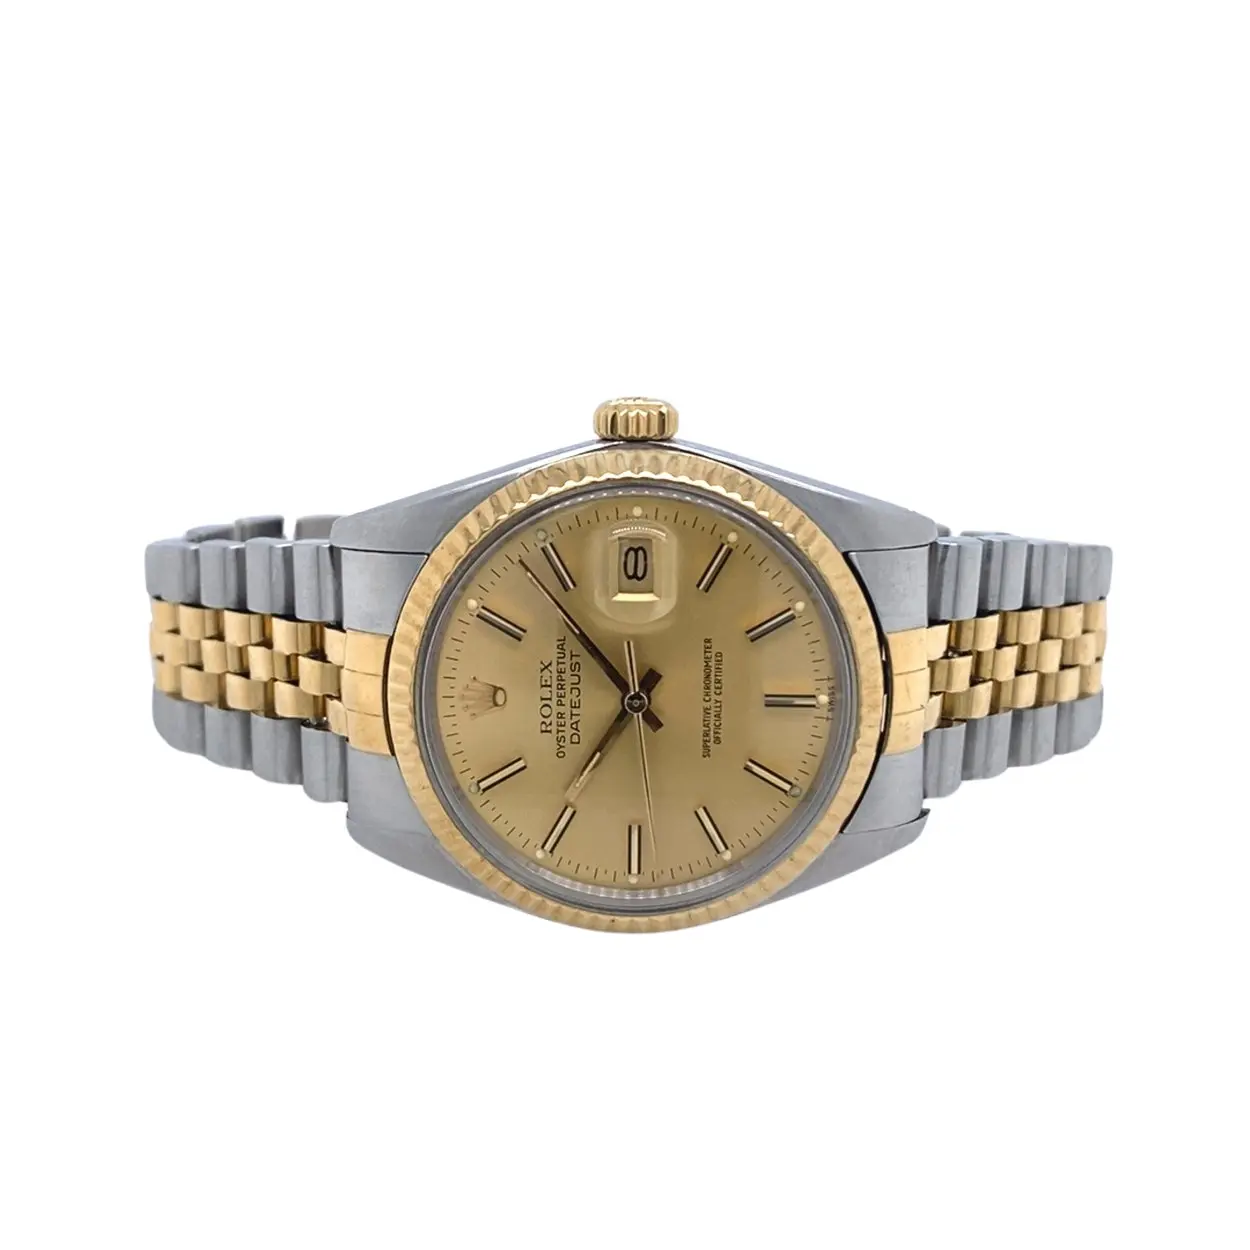 Rolex Datejust 36 16013 36mm Yellow gold and stainless steel Golden